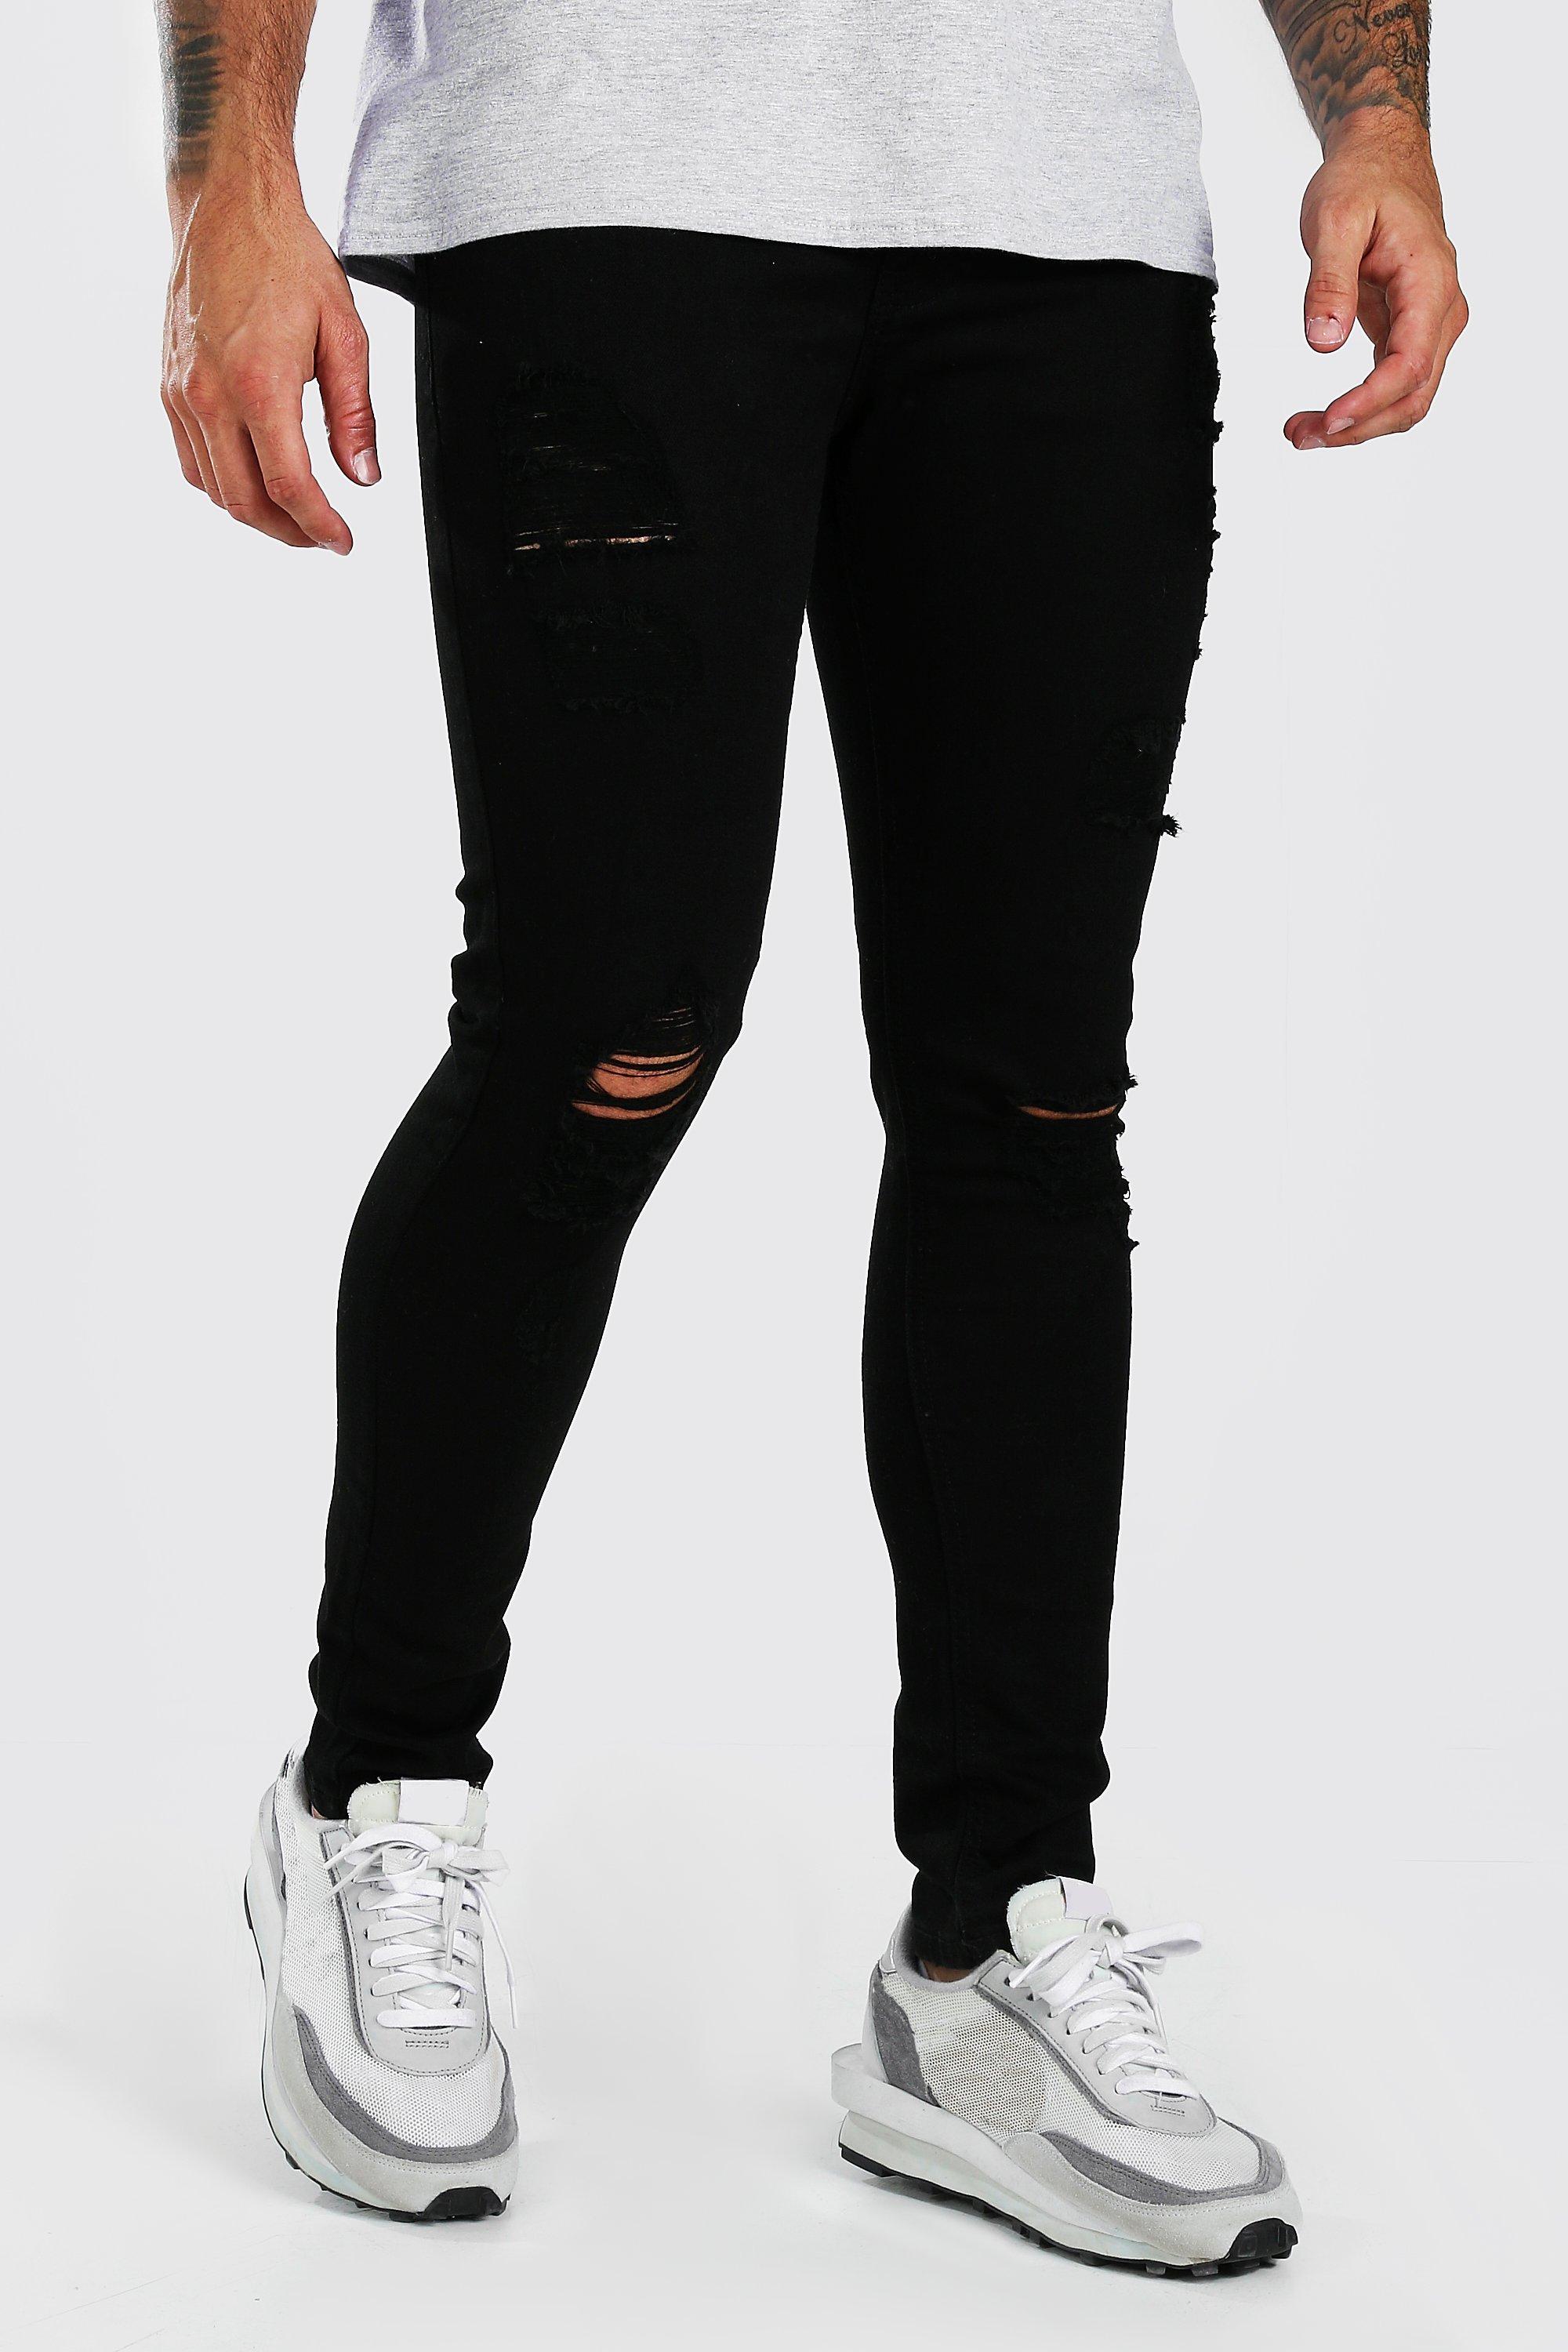 boohooman black ripped jeans